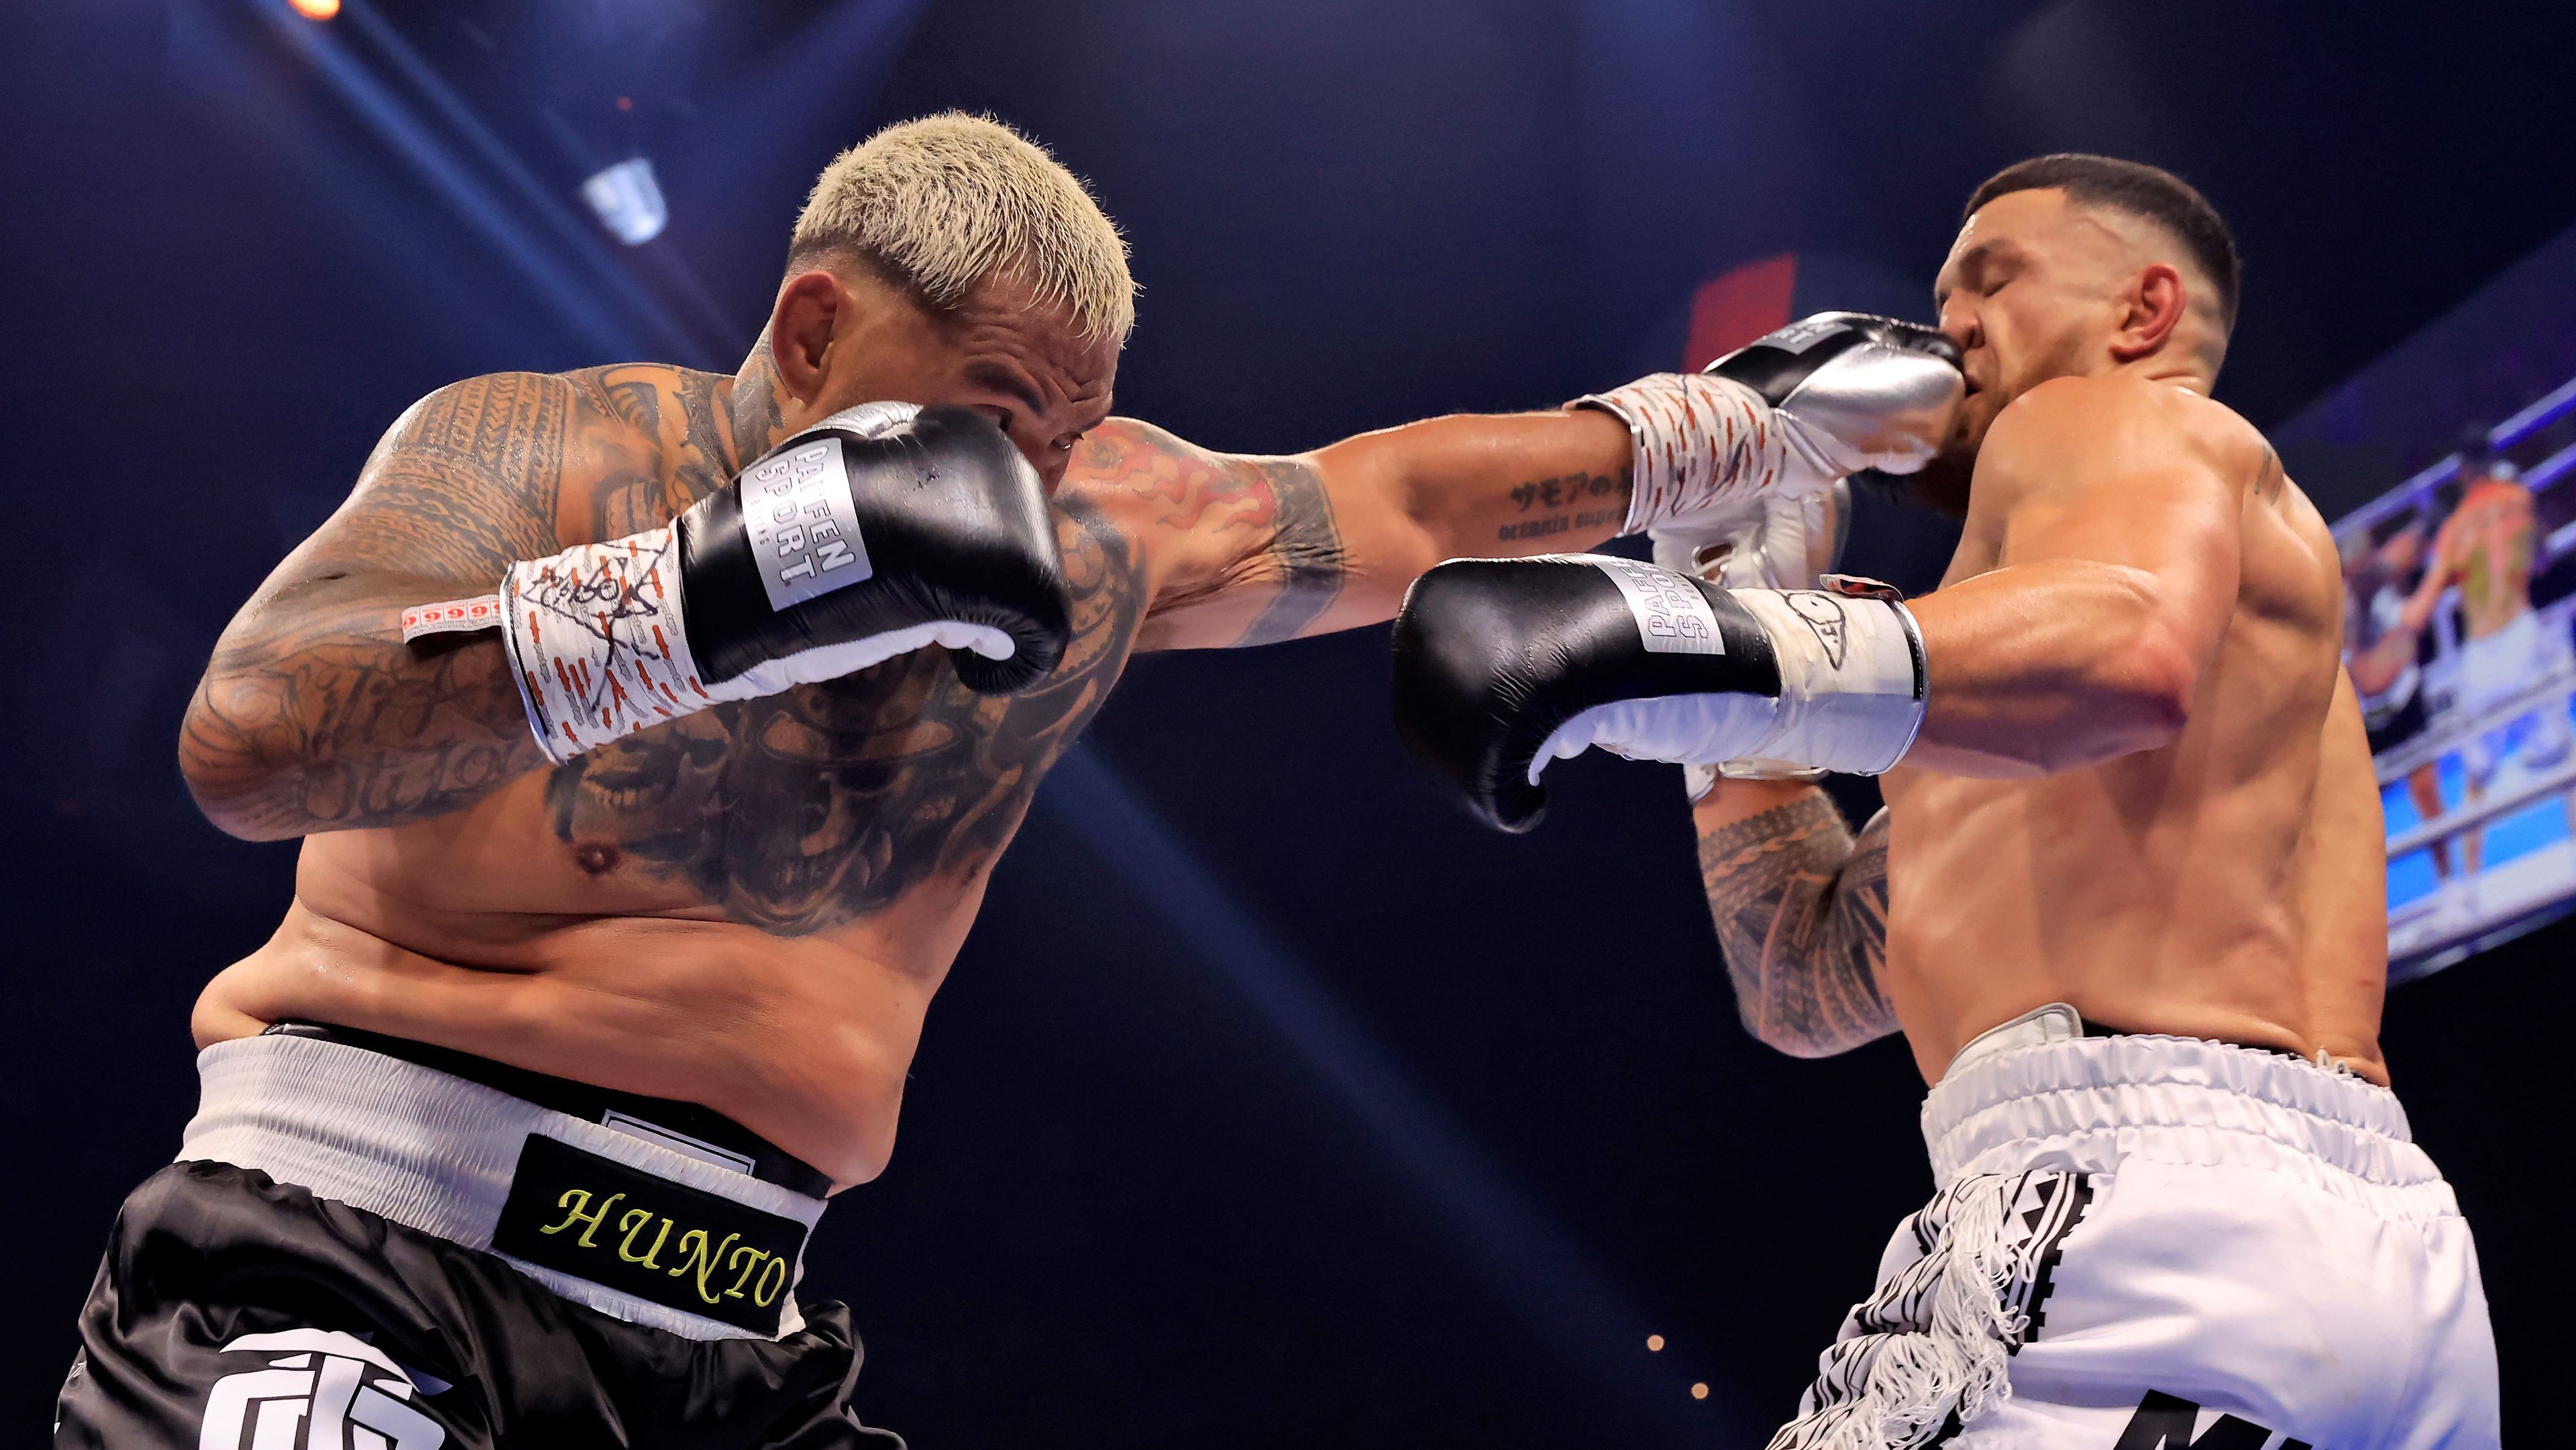 Mark Hunt turned the tide in the fourth round to defeat Sonny Bill Williams by knock-out.